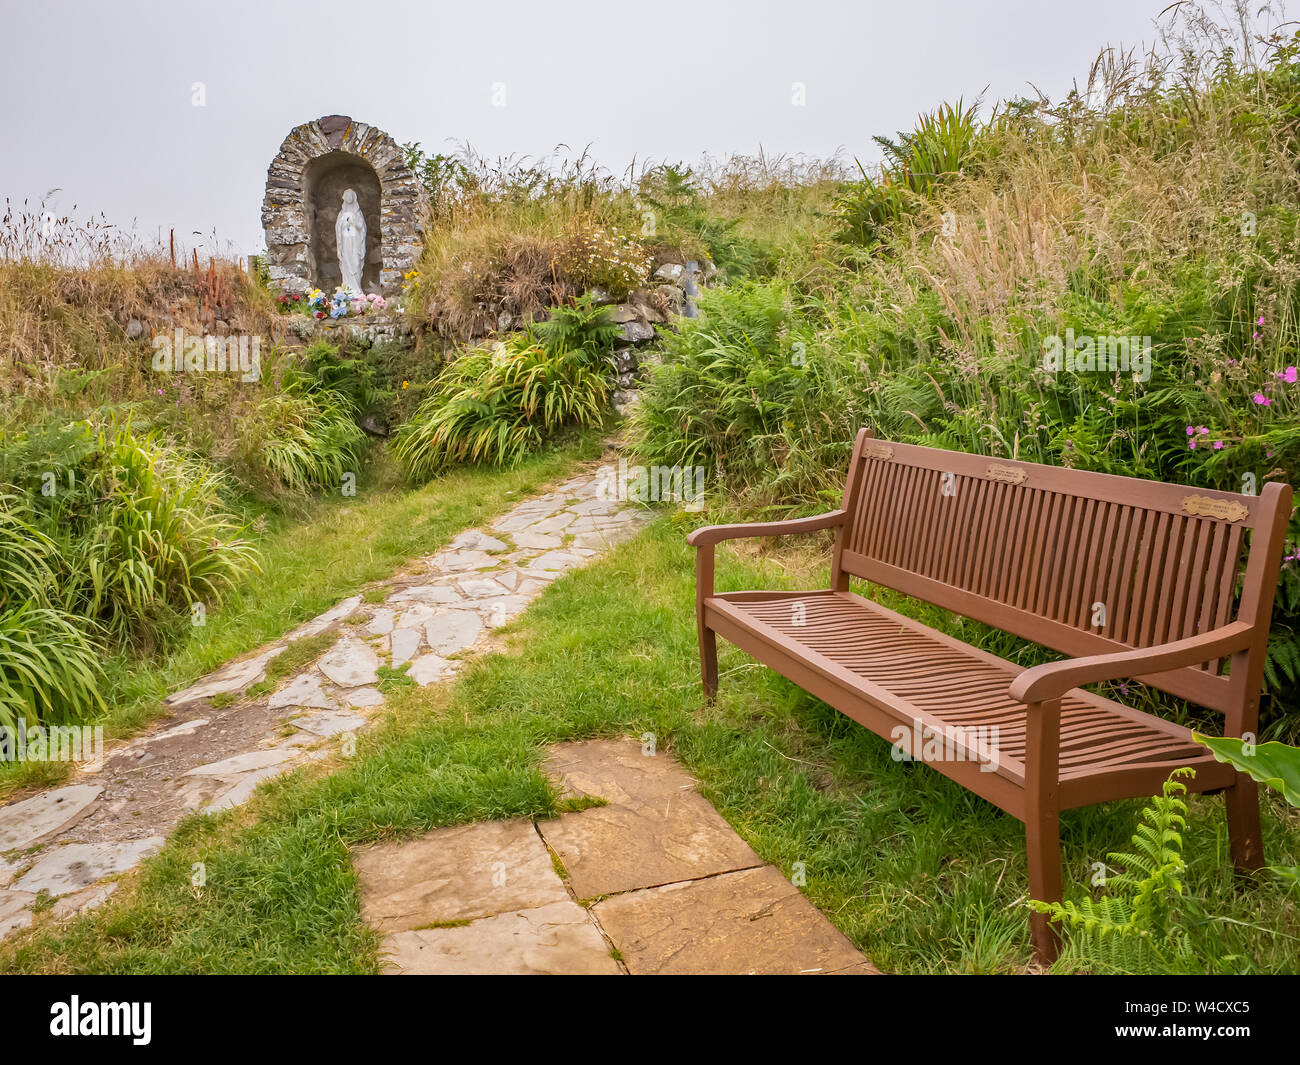 Memorial bench at St Non’s Well, St Non’s Bay on the Welsh Coastal Path, South Wales Stock Photo